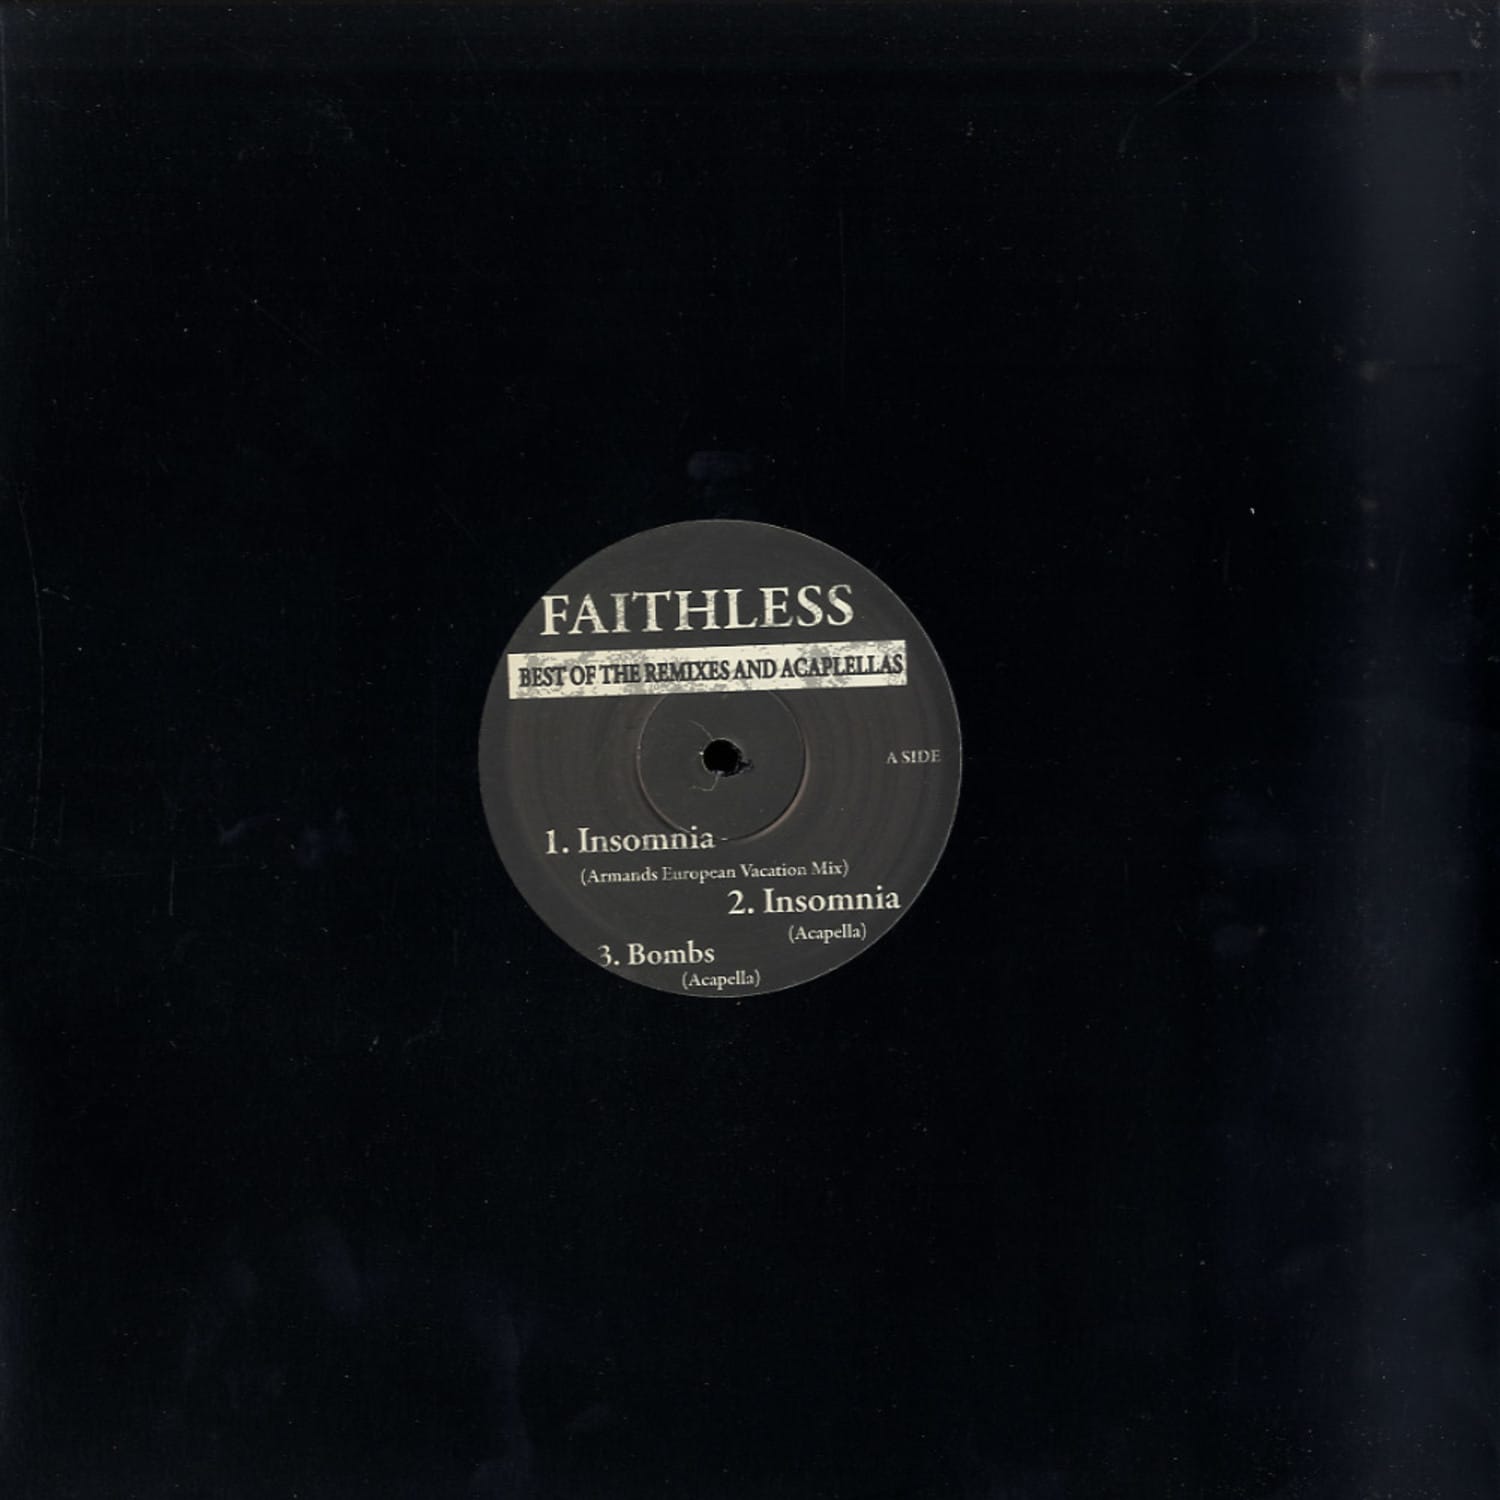 Faithless - BEST OF REMIXES AND ACAPELLAS